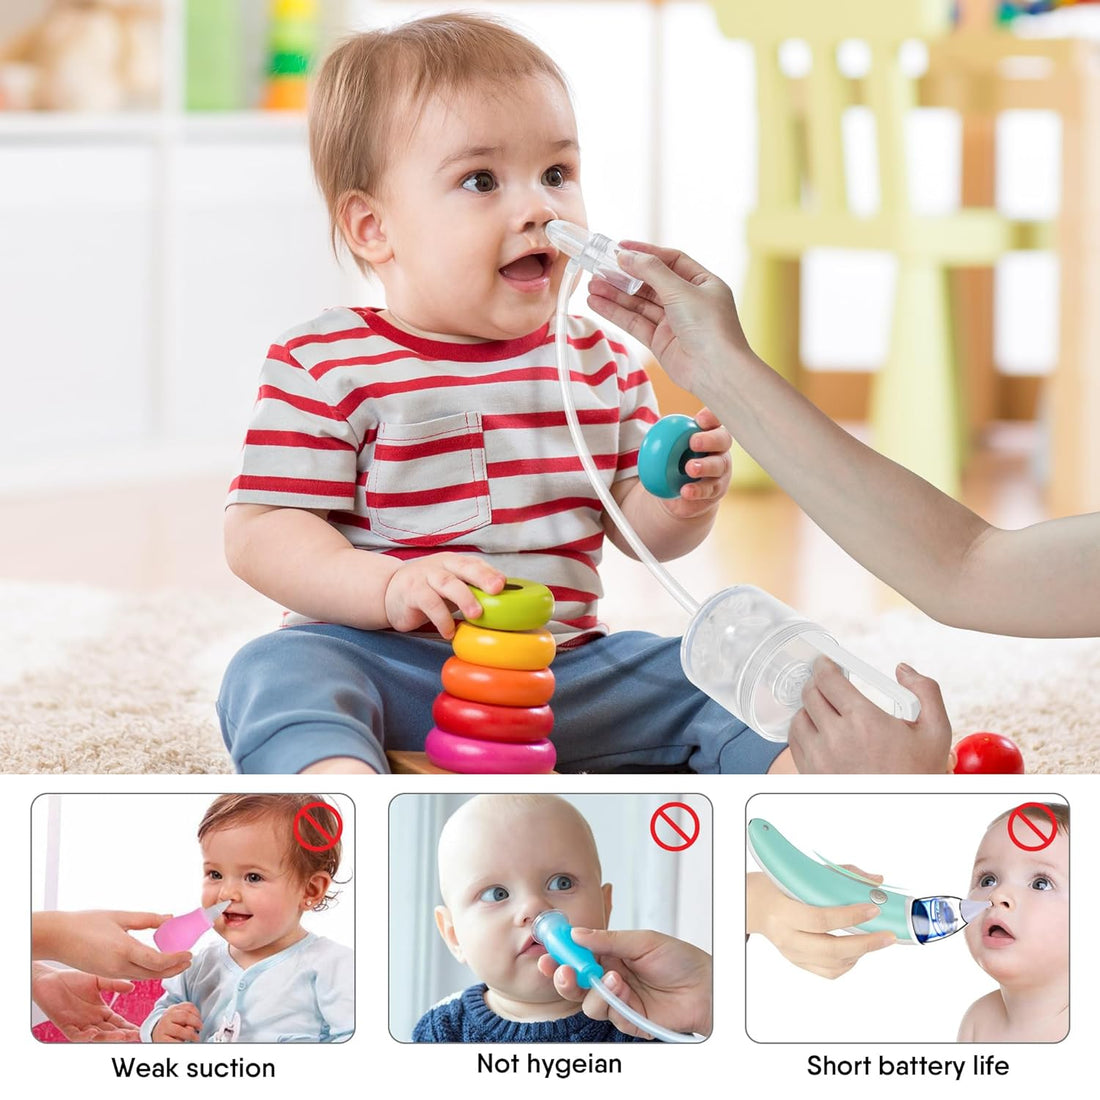 Obee Odee Nasal Aspirator for Baby, Powerful Hand Pump and Additional Silicone Nose Tip for All Ages Efficient & Hygienic Nose Suction for Baby, Child, Toddler